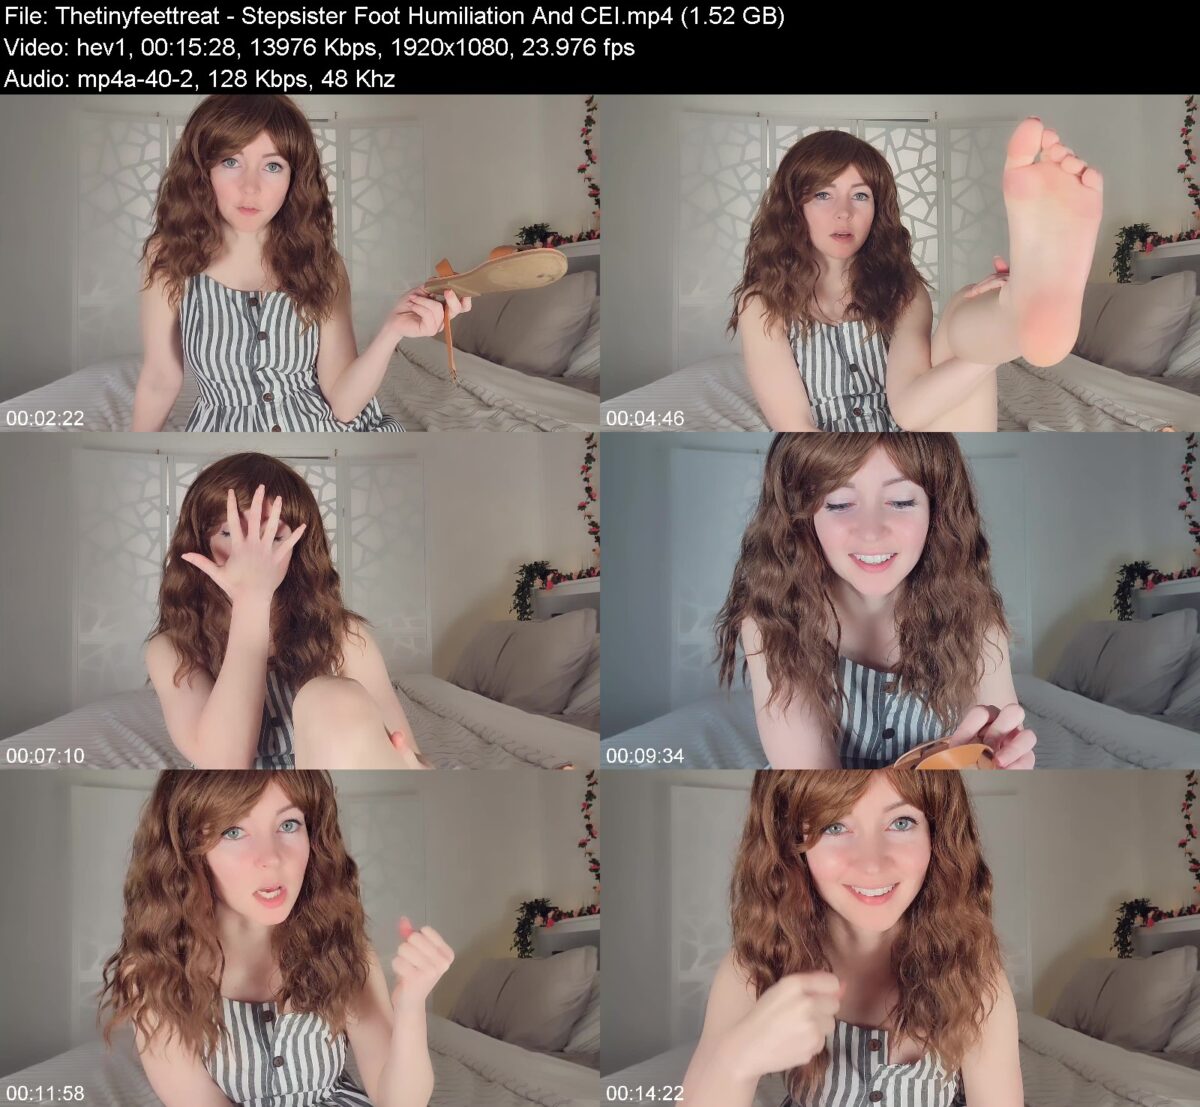 Actress: Thetinyfeettreat. Title and Studio: Stepsister Foot Humiliation And CEI